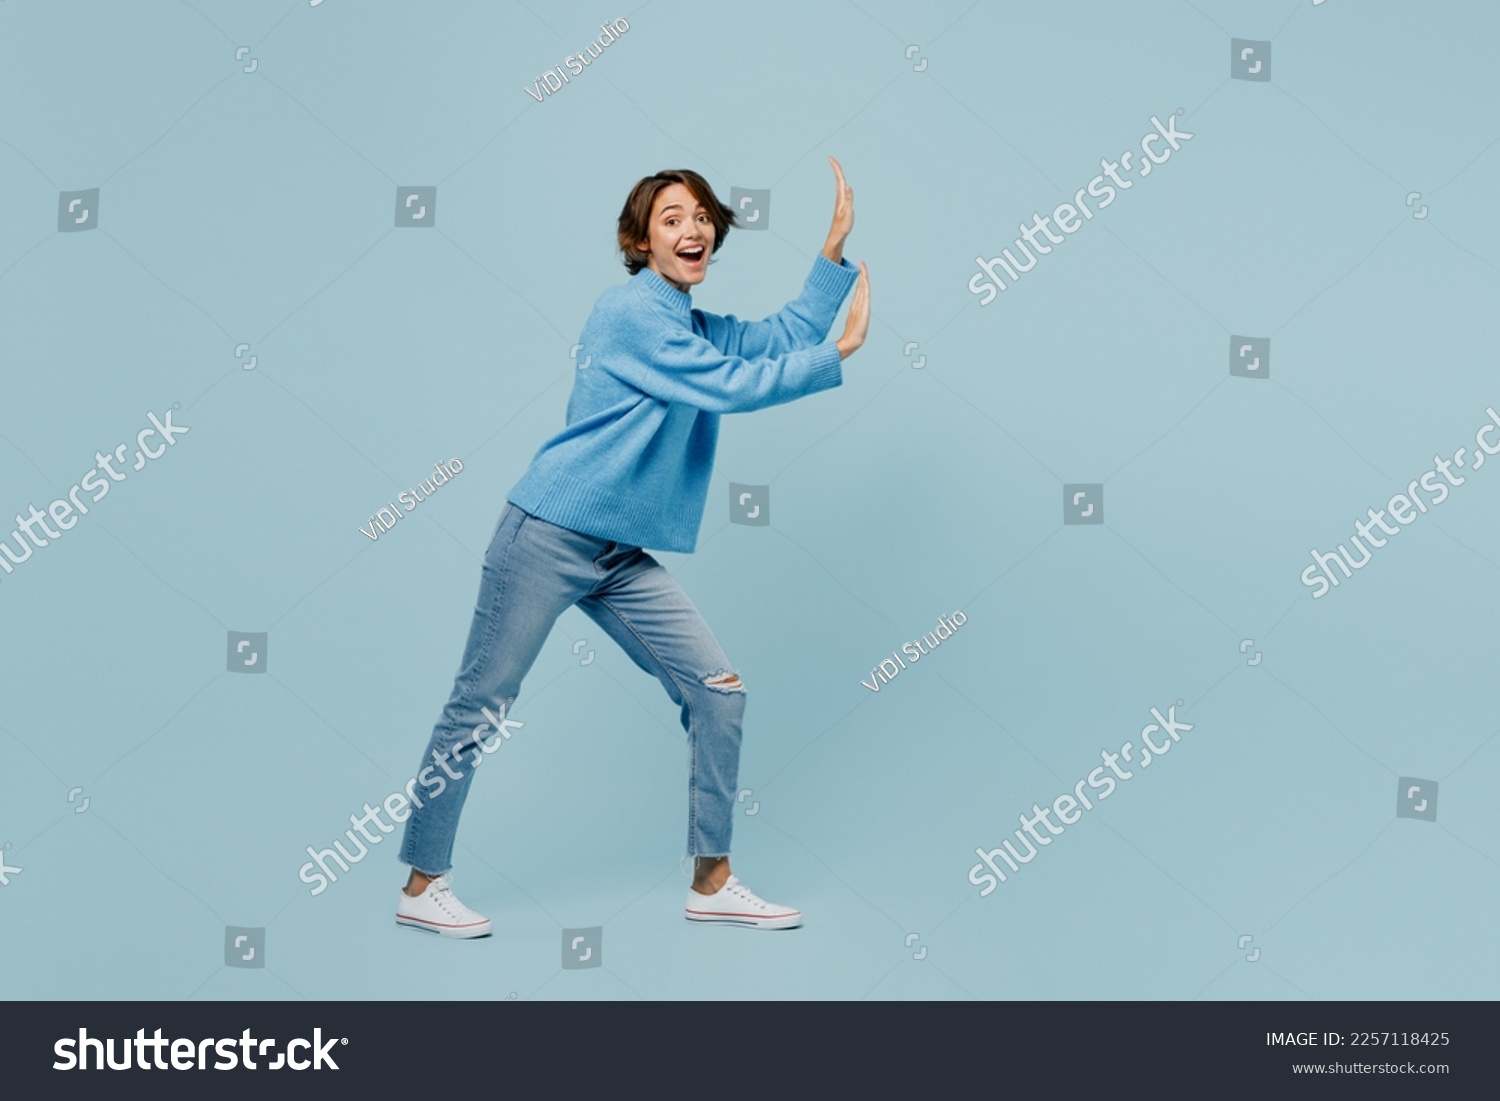 Full body young woman wear knitted sweater look camera push invisible object with copy space area mock up isolated on plain pastel light blue cyan background studio portrait. People lifestyle concept #2257118425